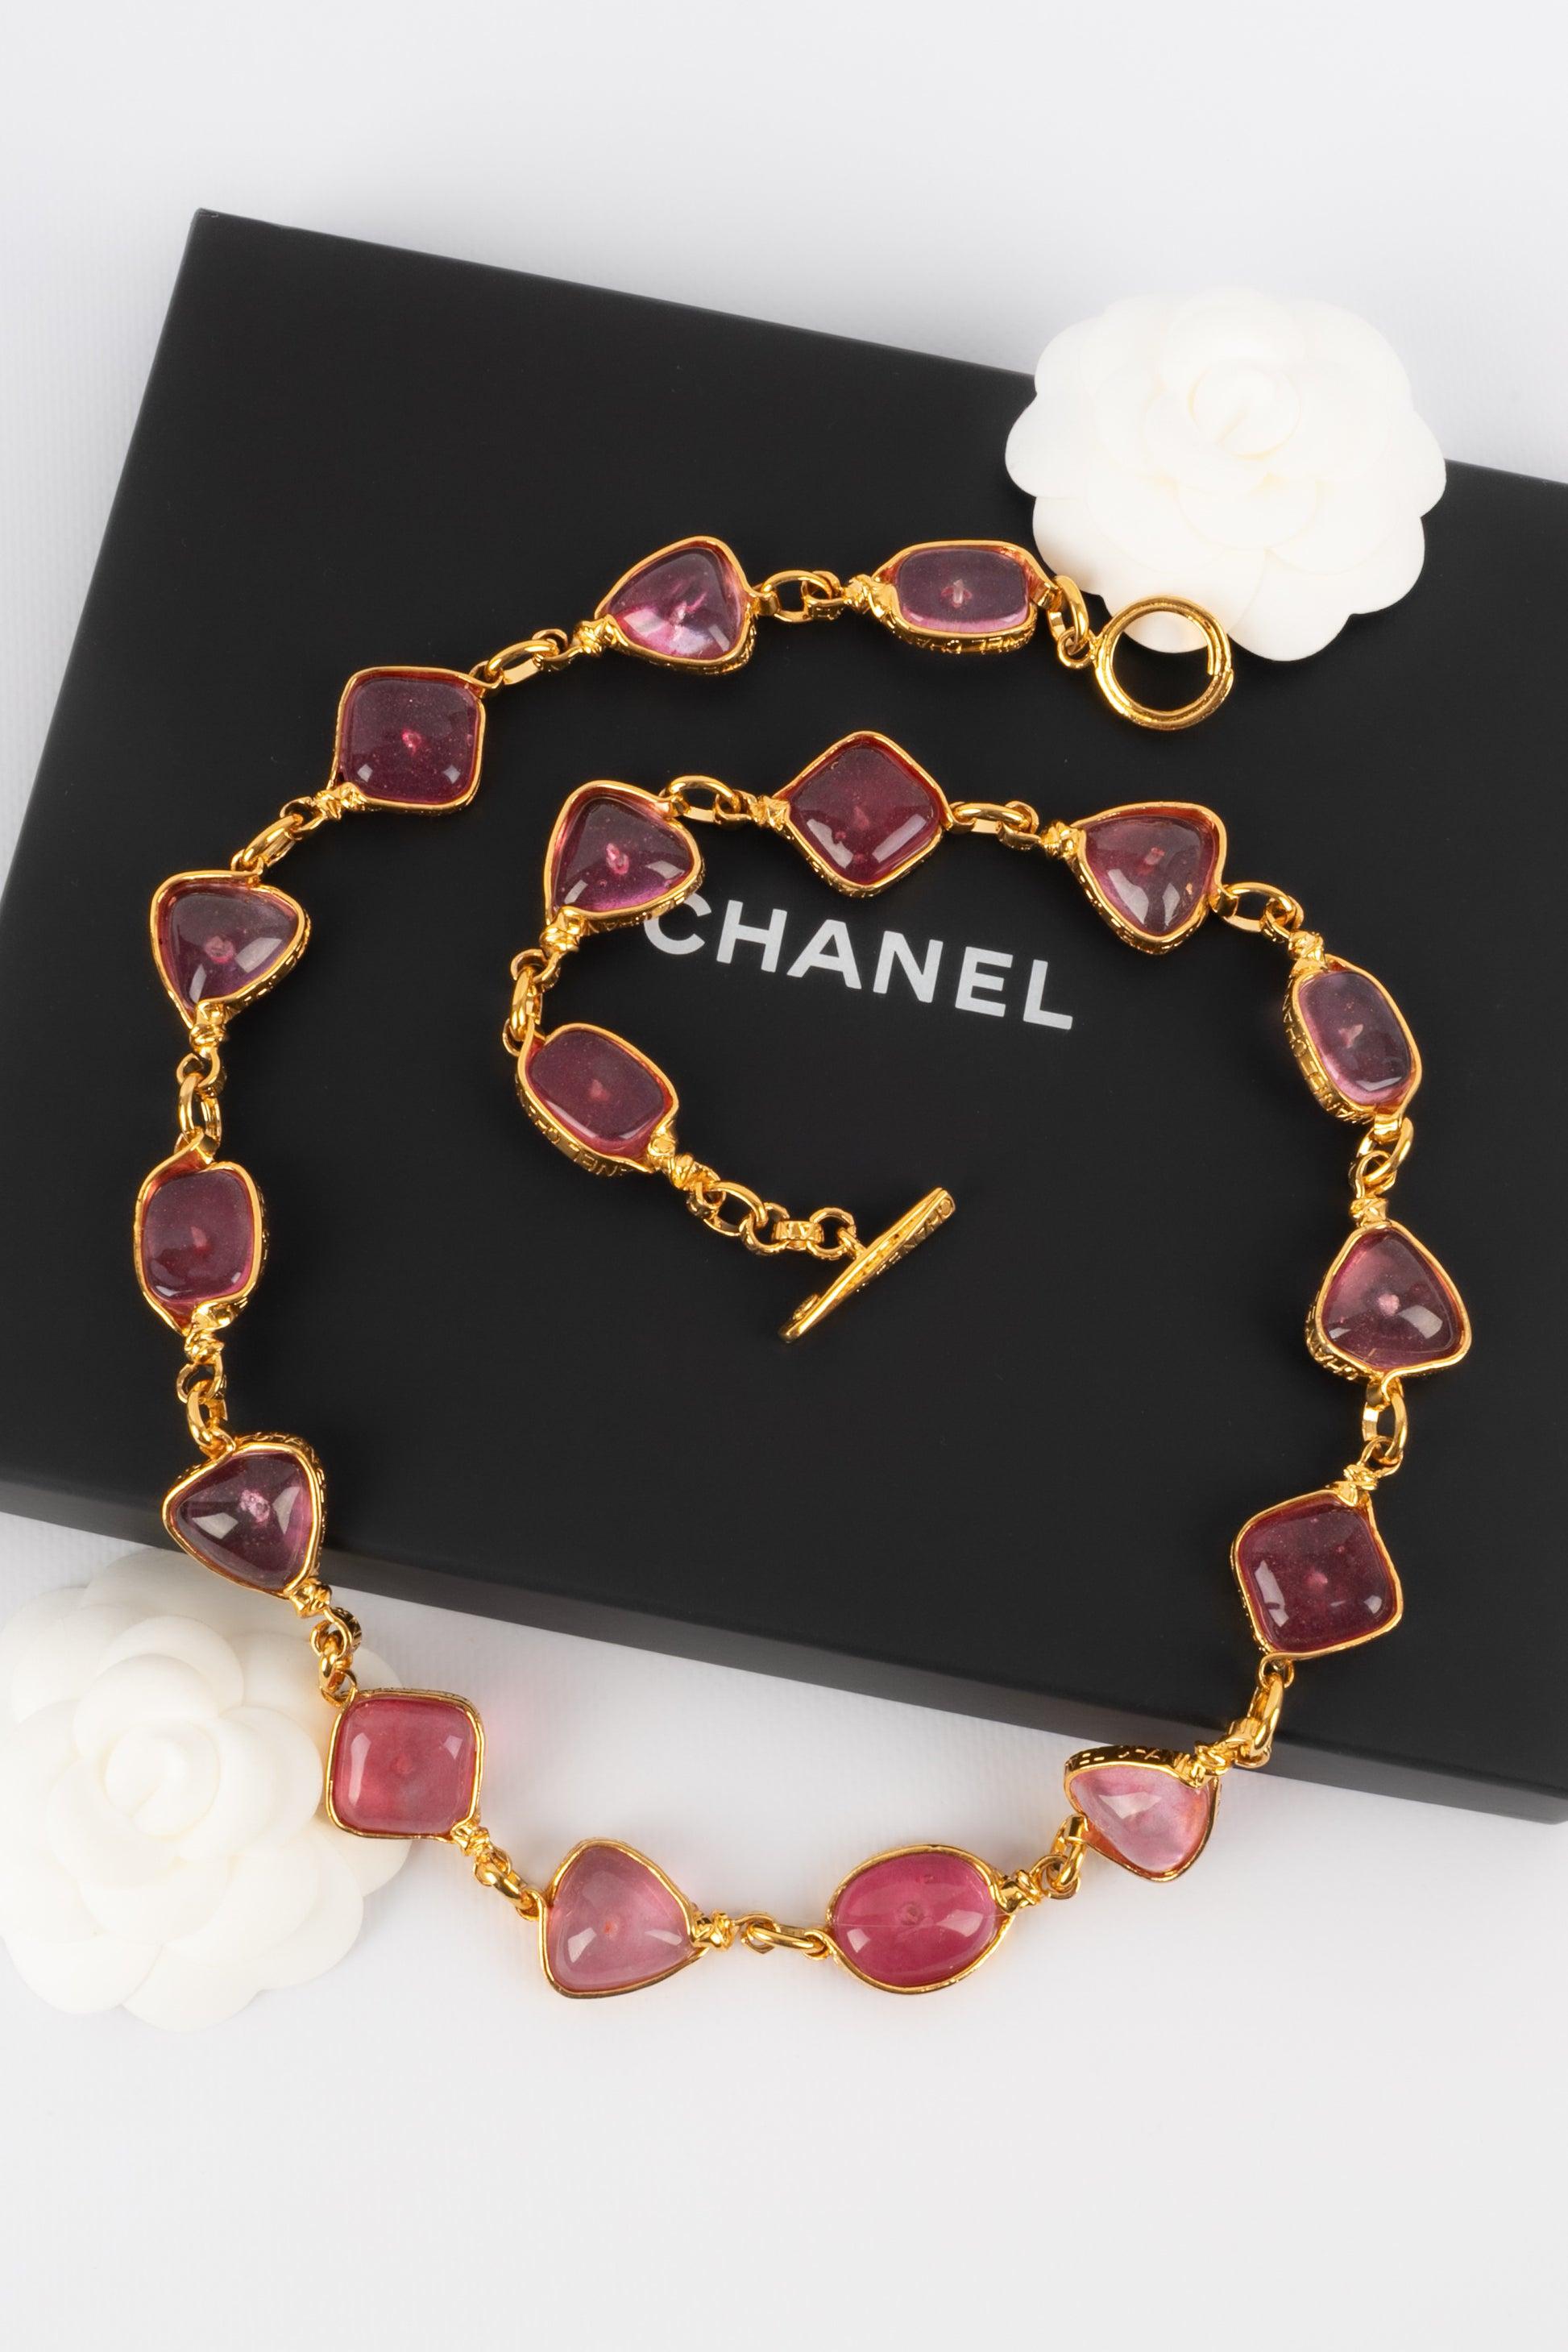 Chanel Articulated Necklace with Pink Glass Paste, 1996 For Sale 4